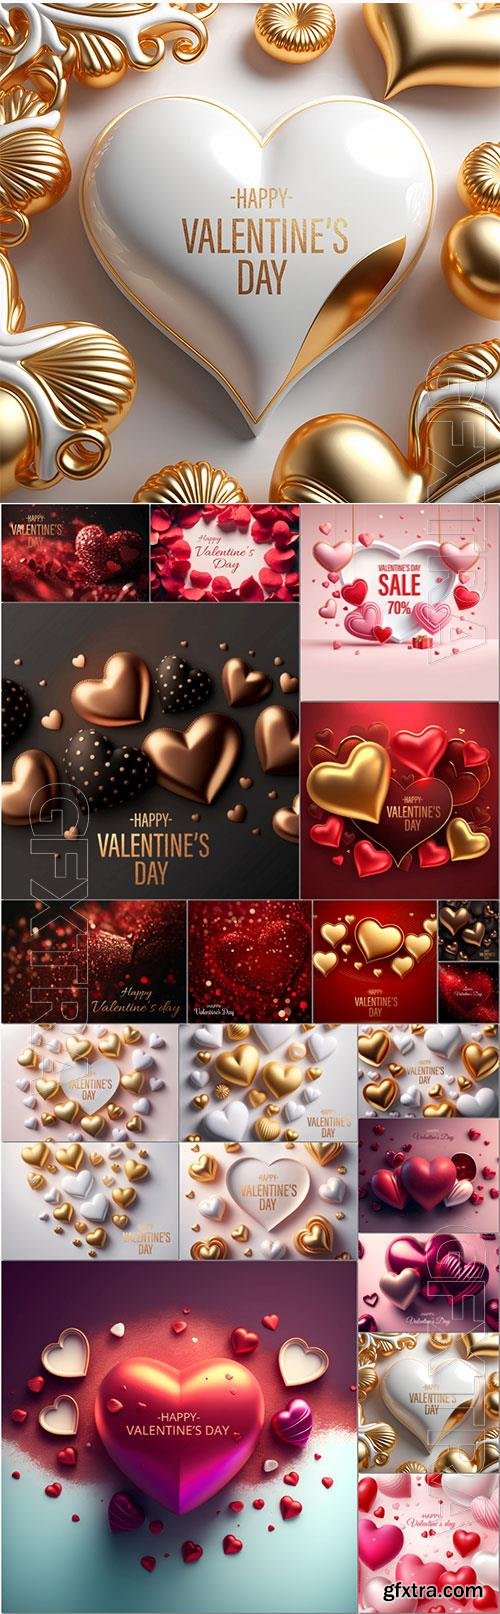 PSD set of valentine's day 3d background with gold and red beautiful heart